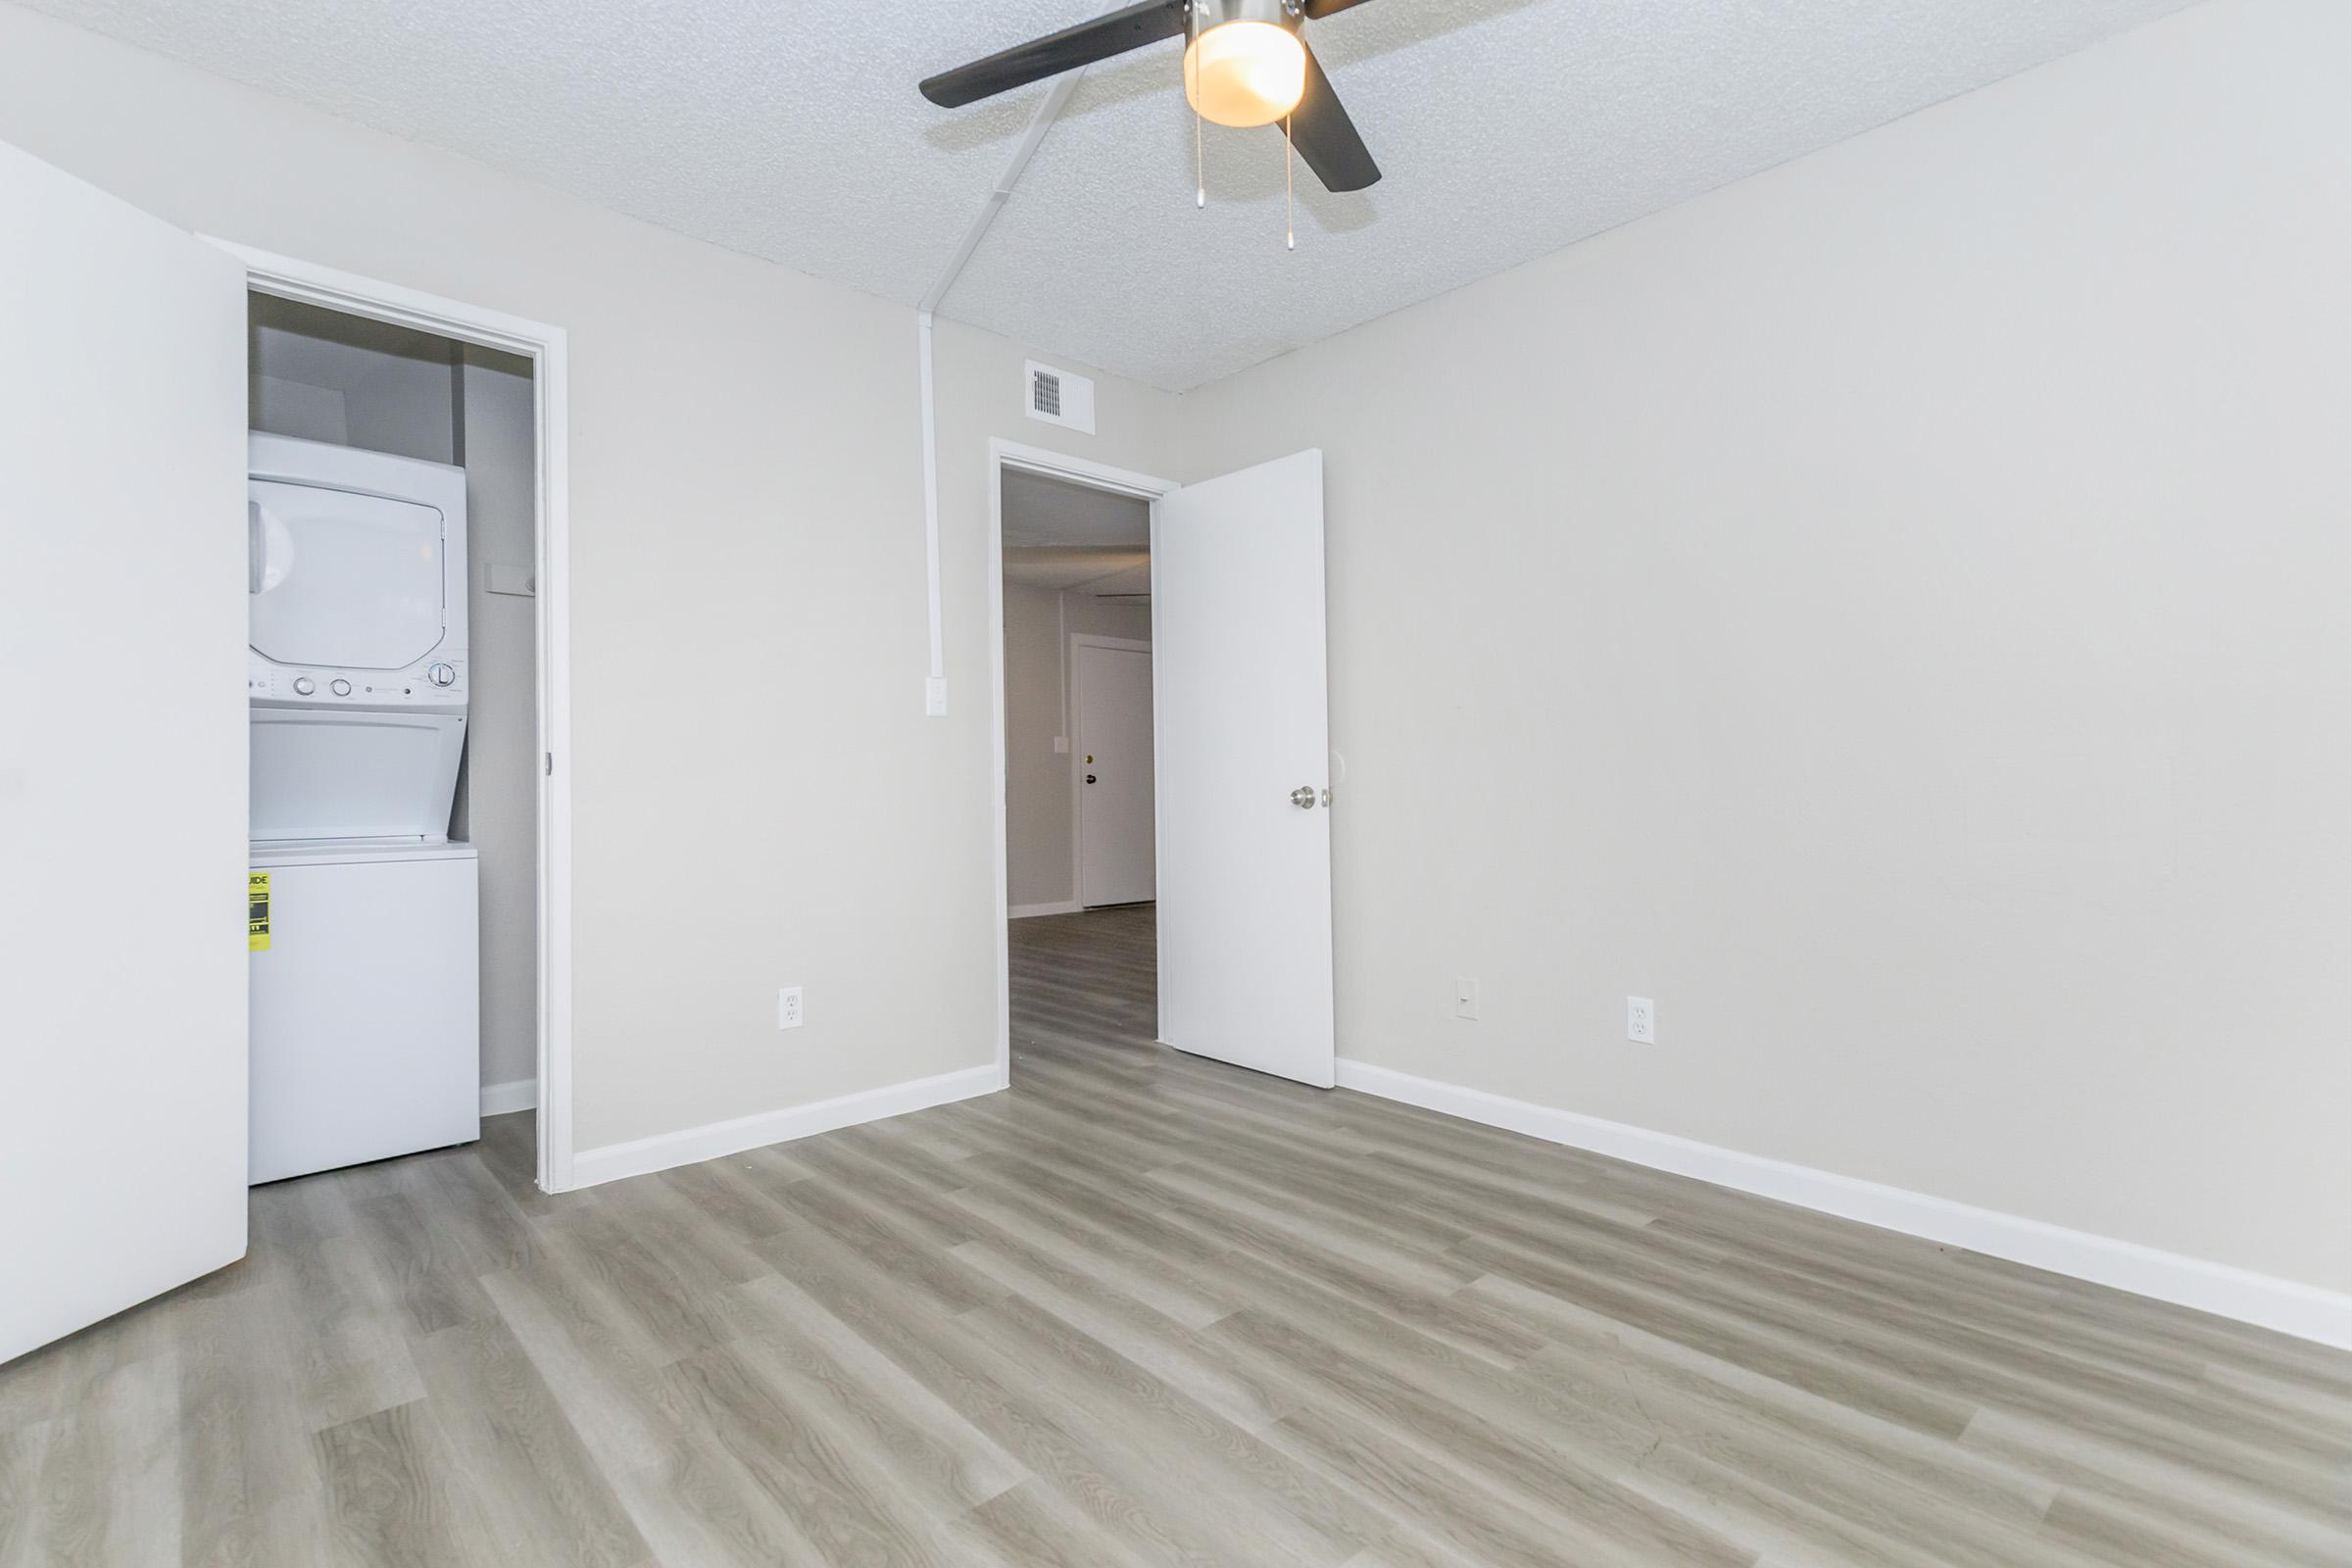 Spacious empty Phoenix apartment bedroom with ceiling fan and washer and dryer in closet